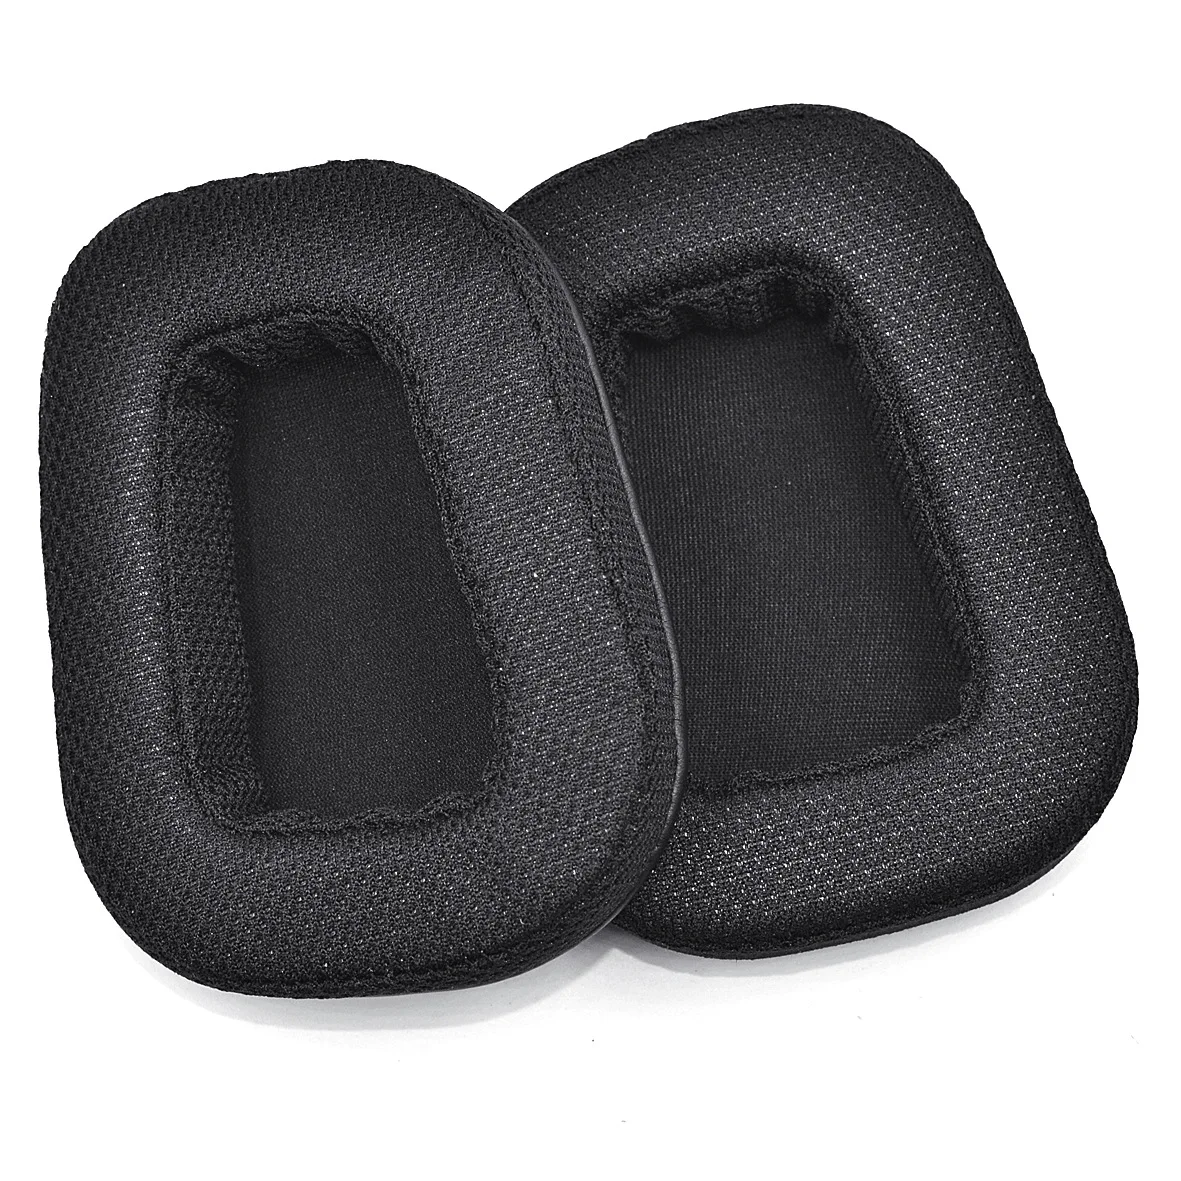 Replacement Ear Pads Cushions and Headband Kit for Logitech G633 G933 G635 G935 G633S G933S Gaming Headset Earpads